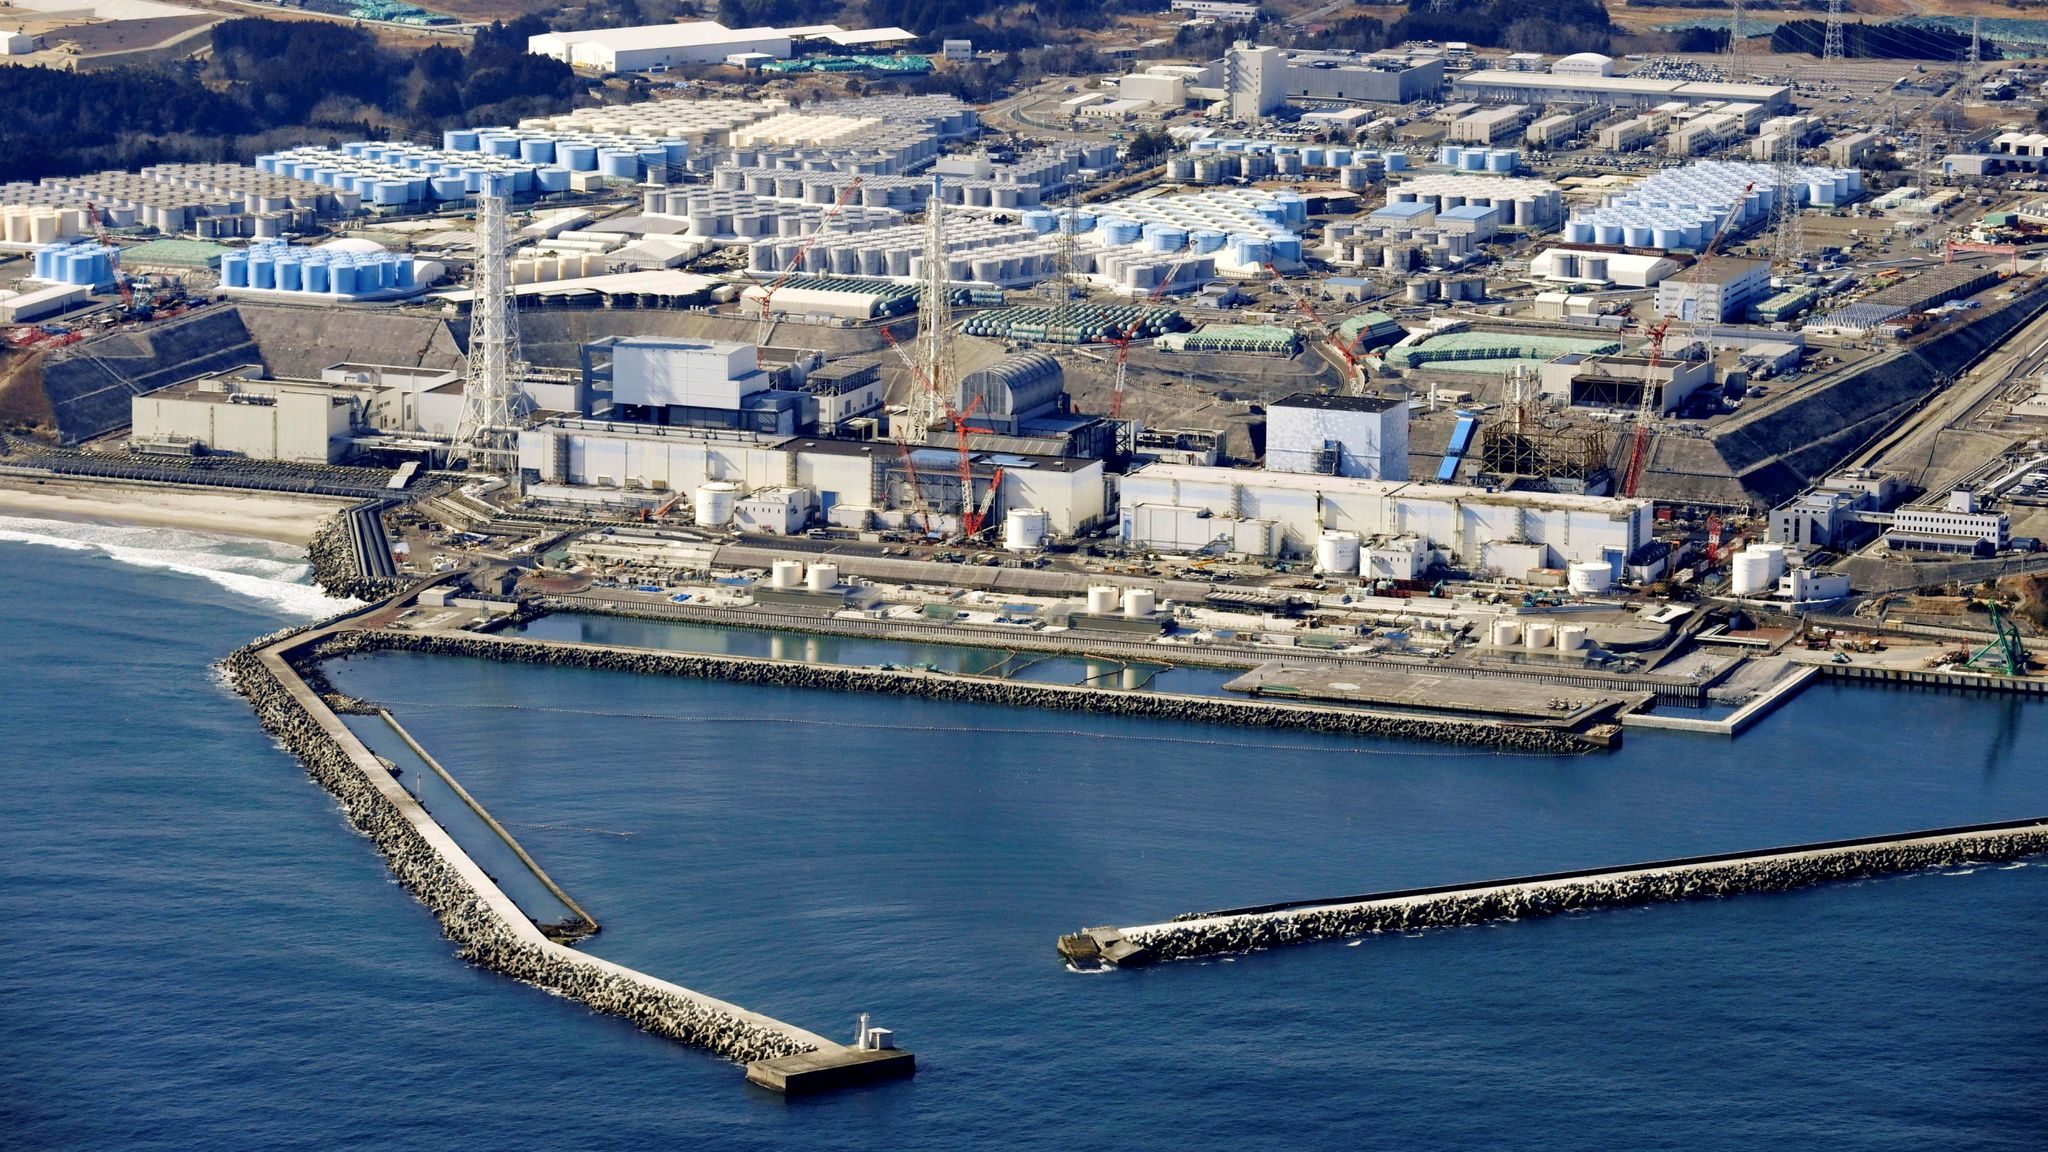 Japan to release more than one million tonnes of radioactive Fukushima